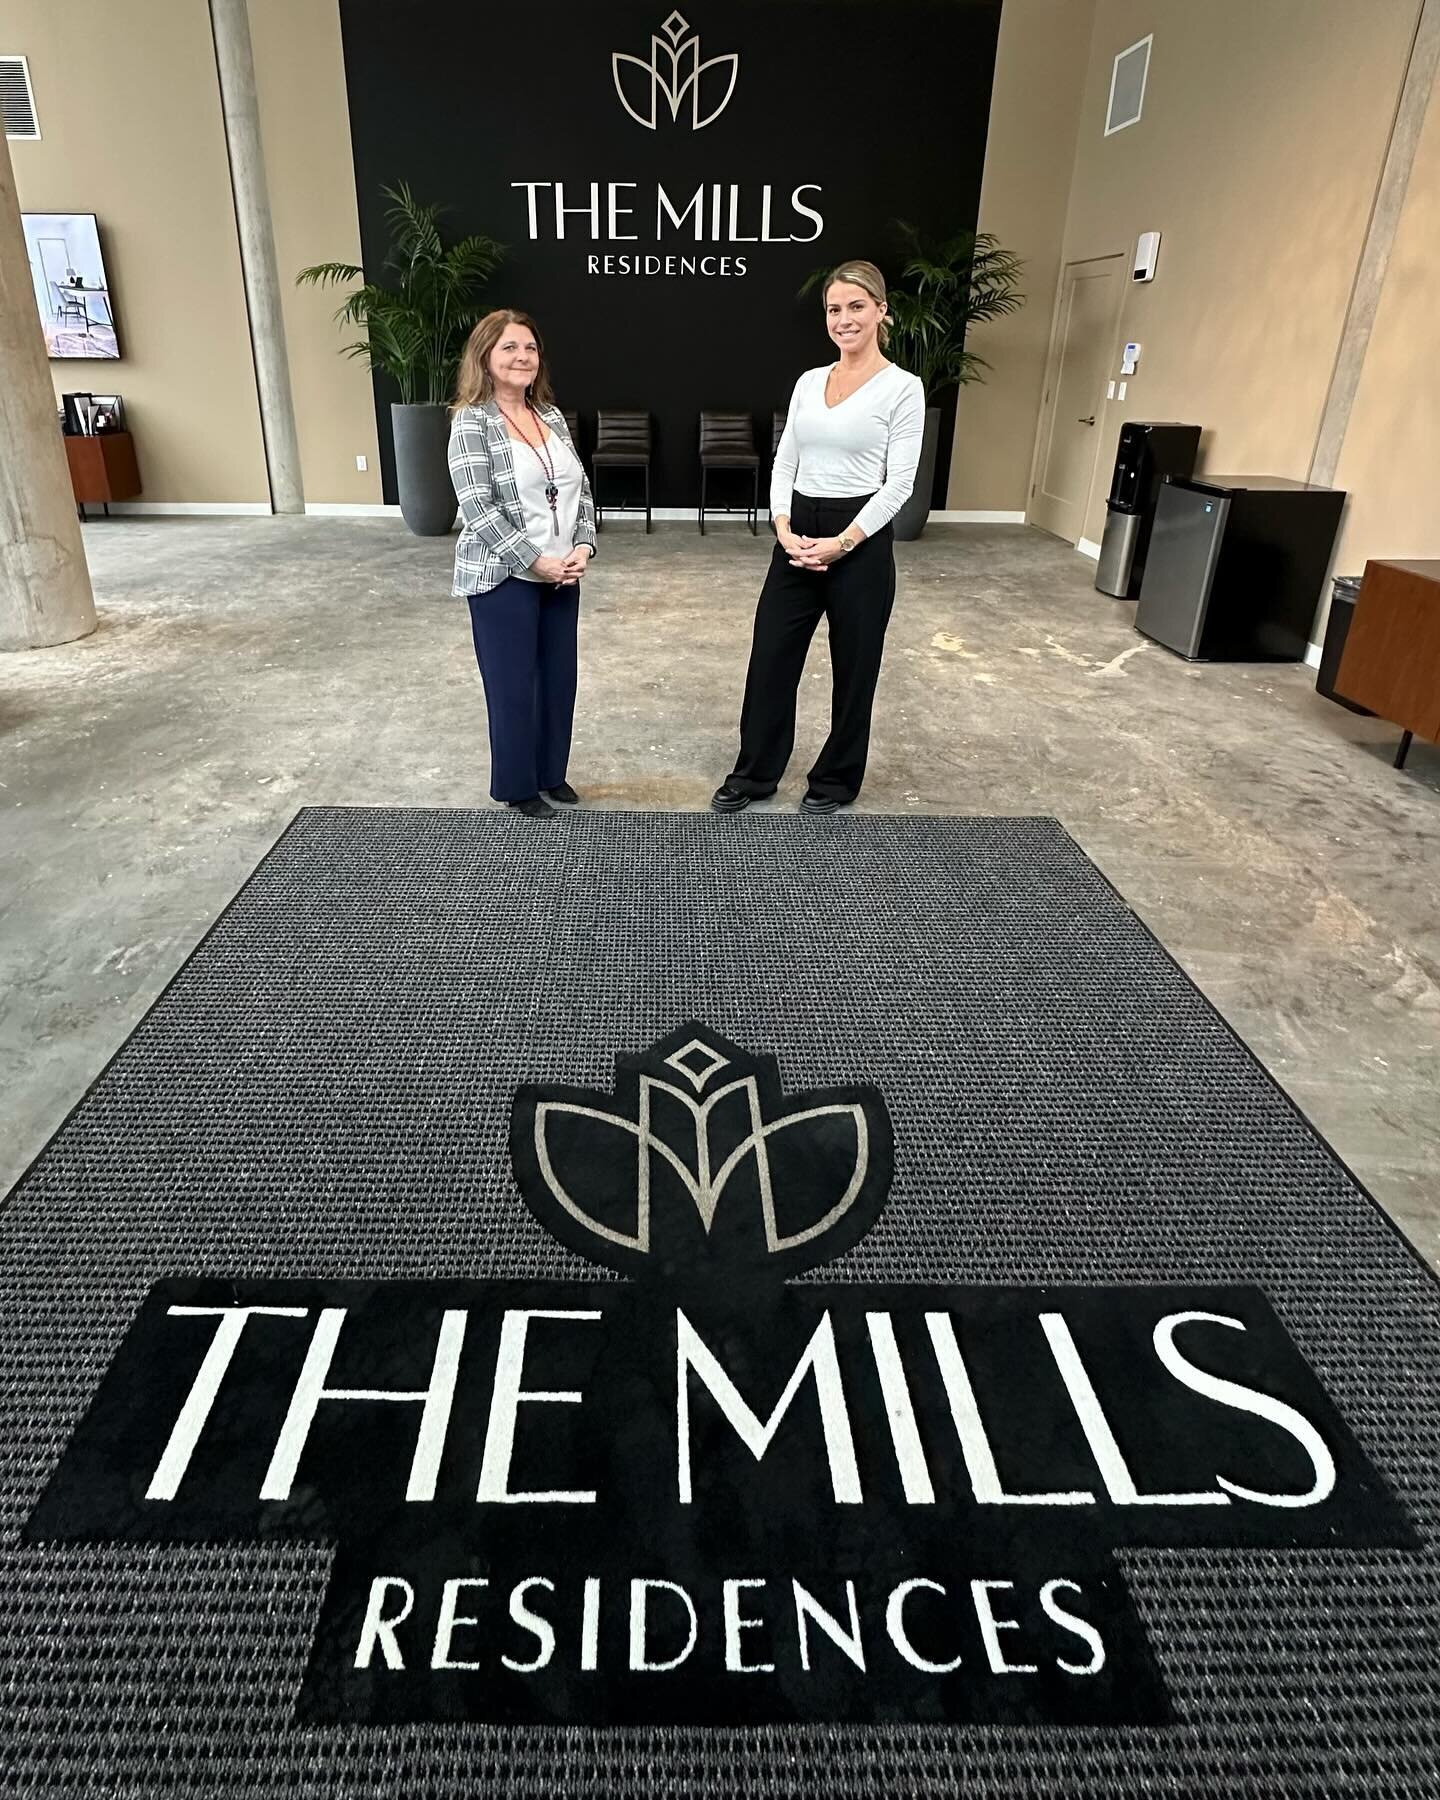 Our Leasing Centre is now open at the corner of Spring Garden and Queen. Please be sure to stop by and speak with our Leasing Specialists. #halifaxlocal #halifax #springgardenarea #springgarden #halifaxapartments #themillsresidences #life #style #nov